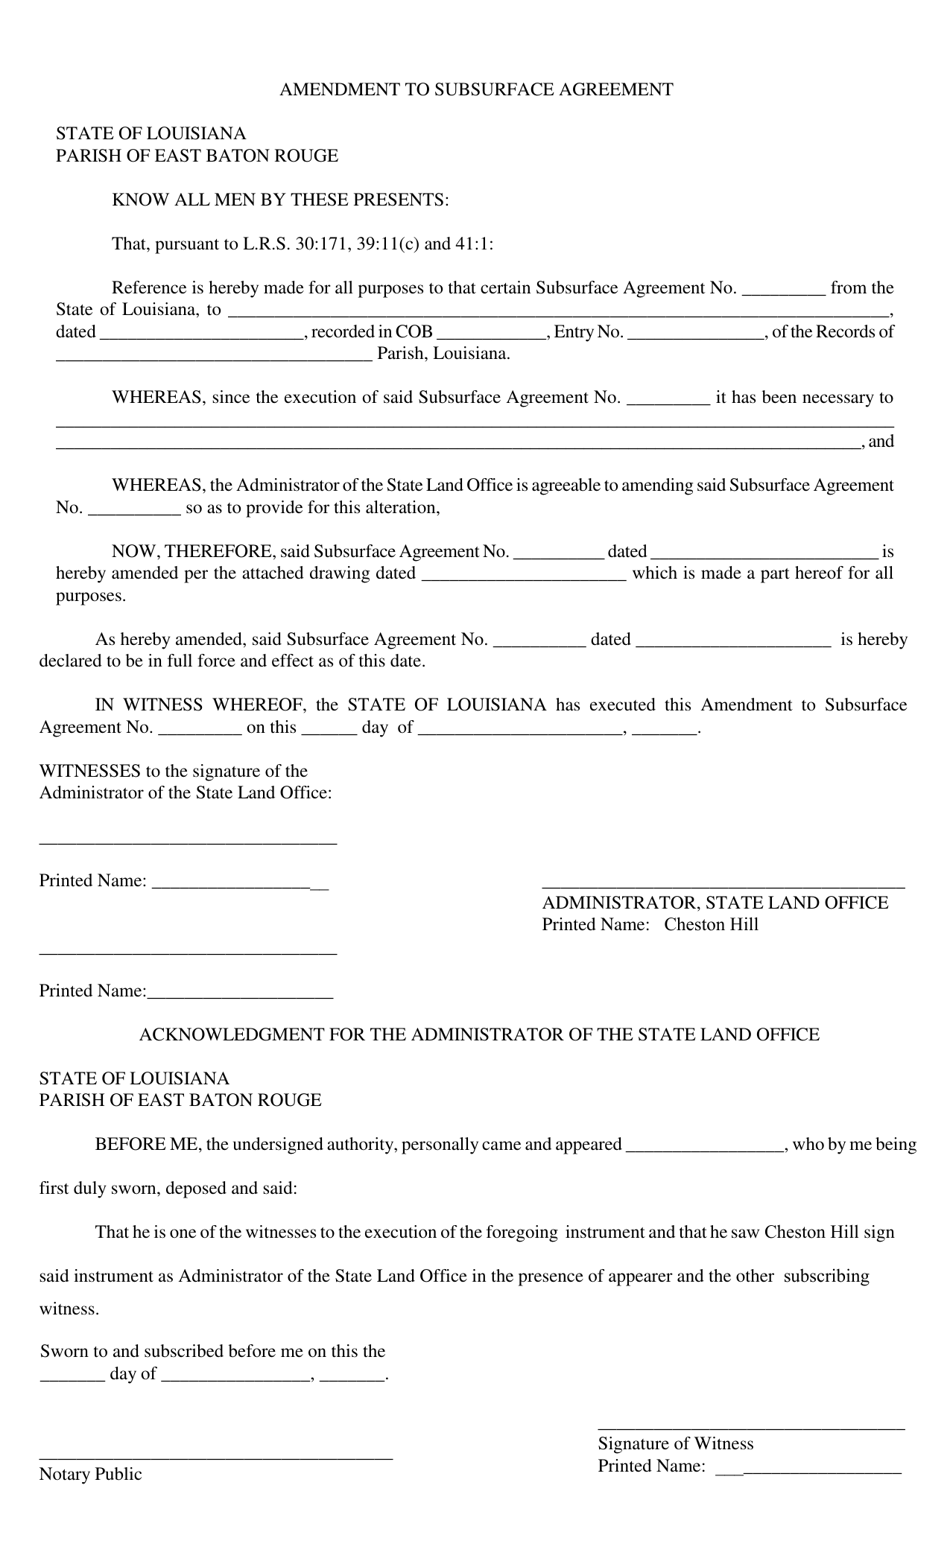 Amendment to Subsurface Agreement - Louisiana, Page 1